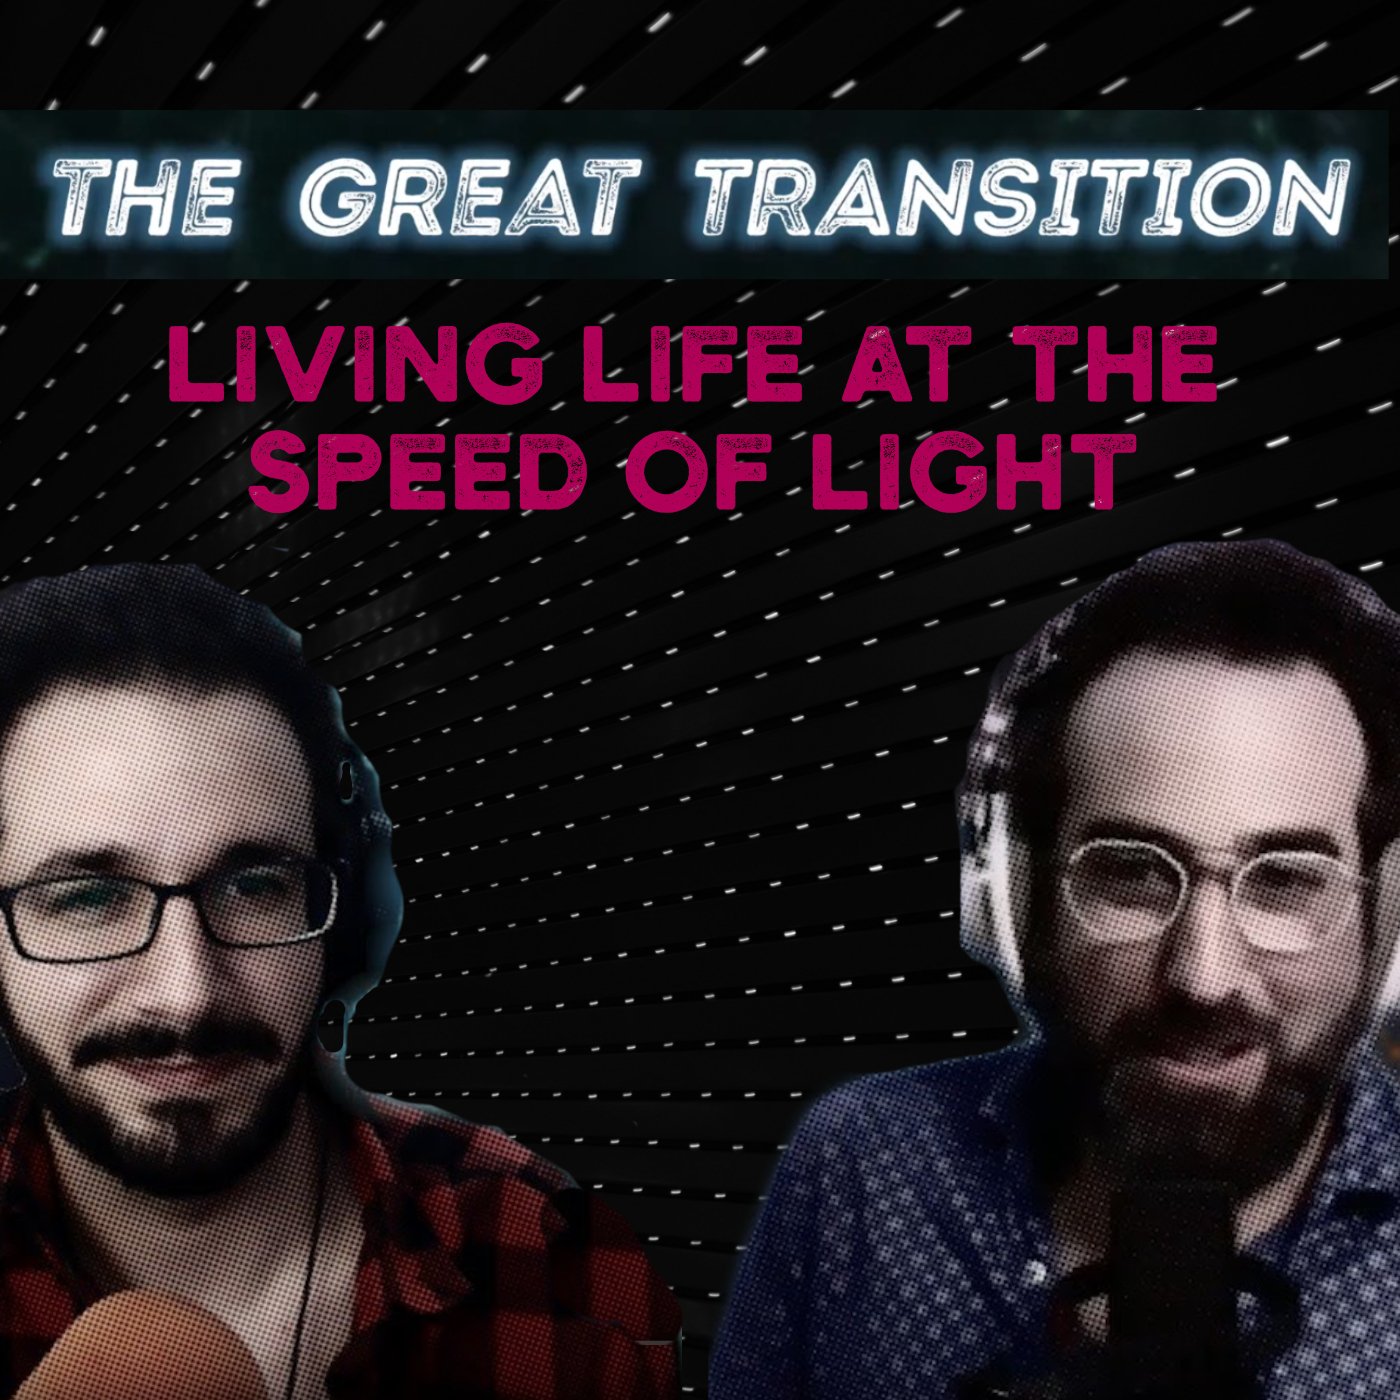 The Great Transition - Live Life At The Speed Of Light